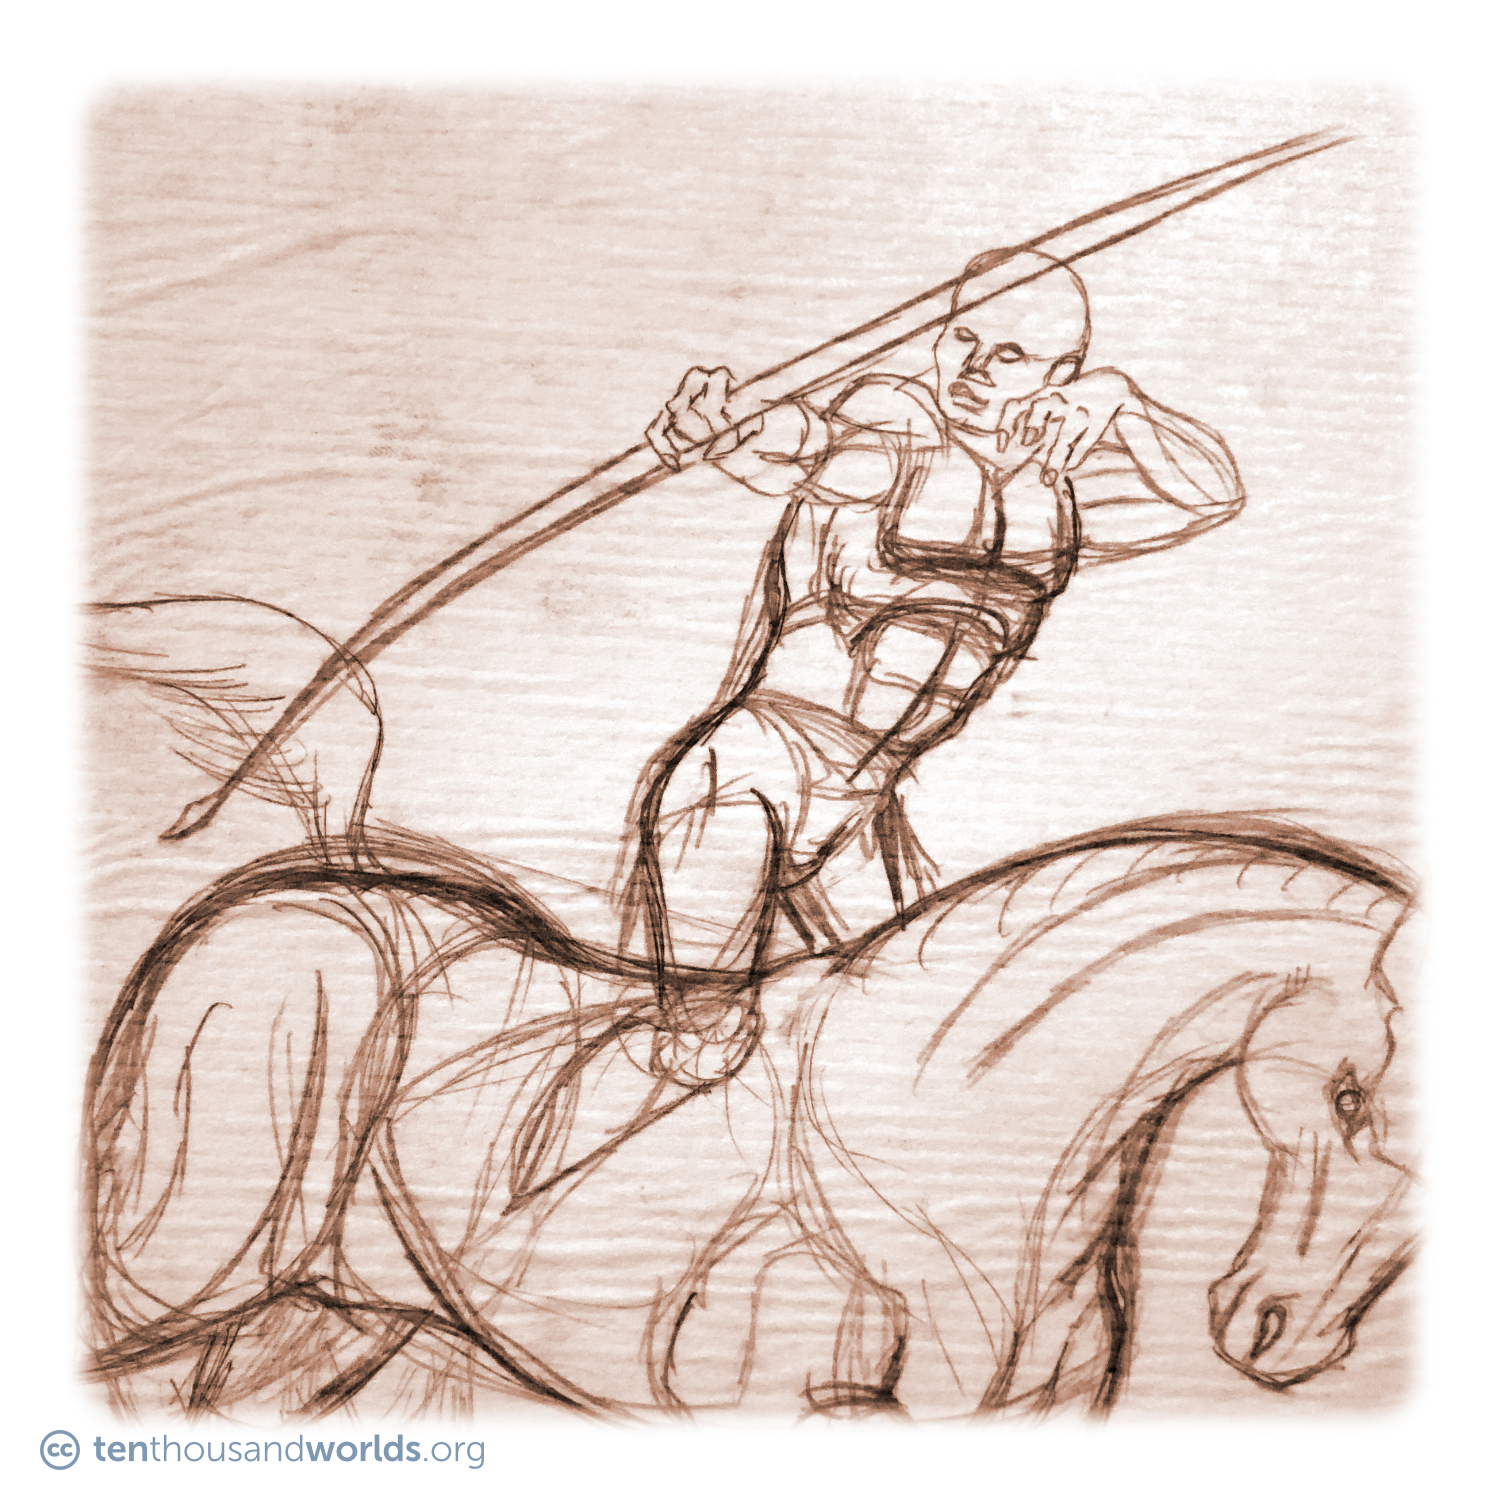 A rough pencil sketch of a human figure shooting a bow while riding a galloping horse.